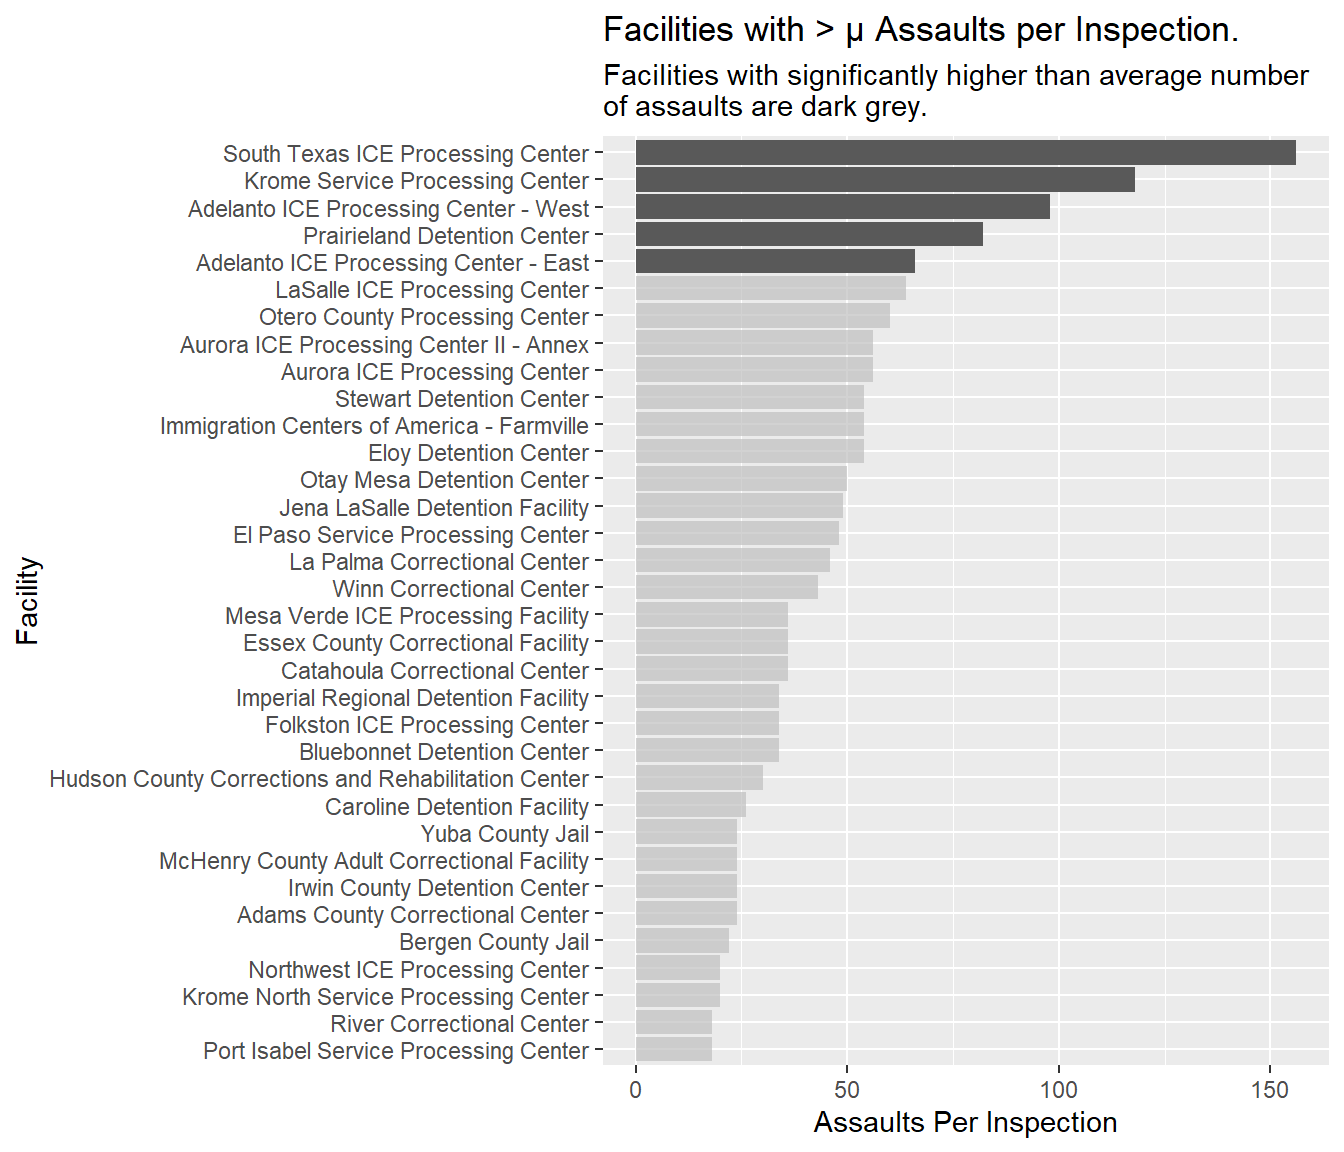 Bar plot of facilities with greater than average number of assaults reported per inspection.